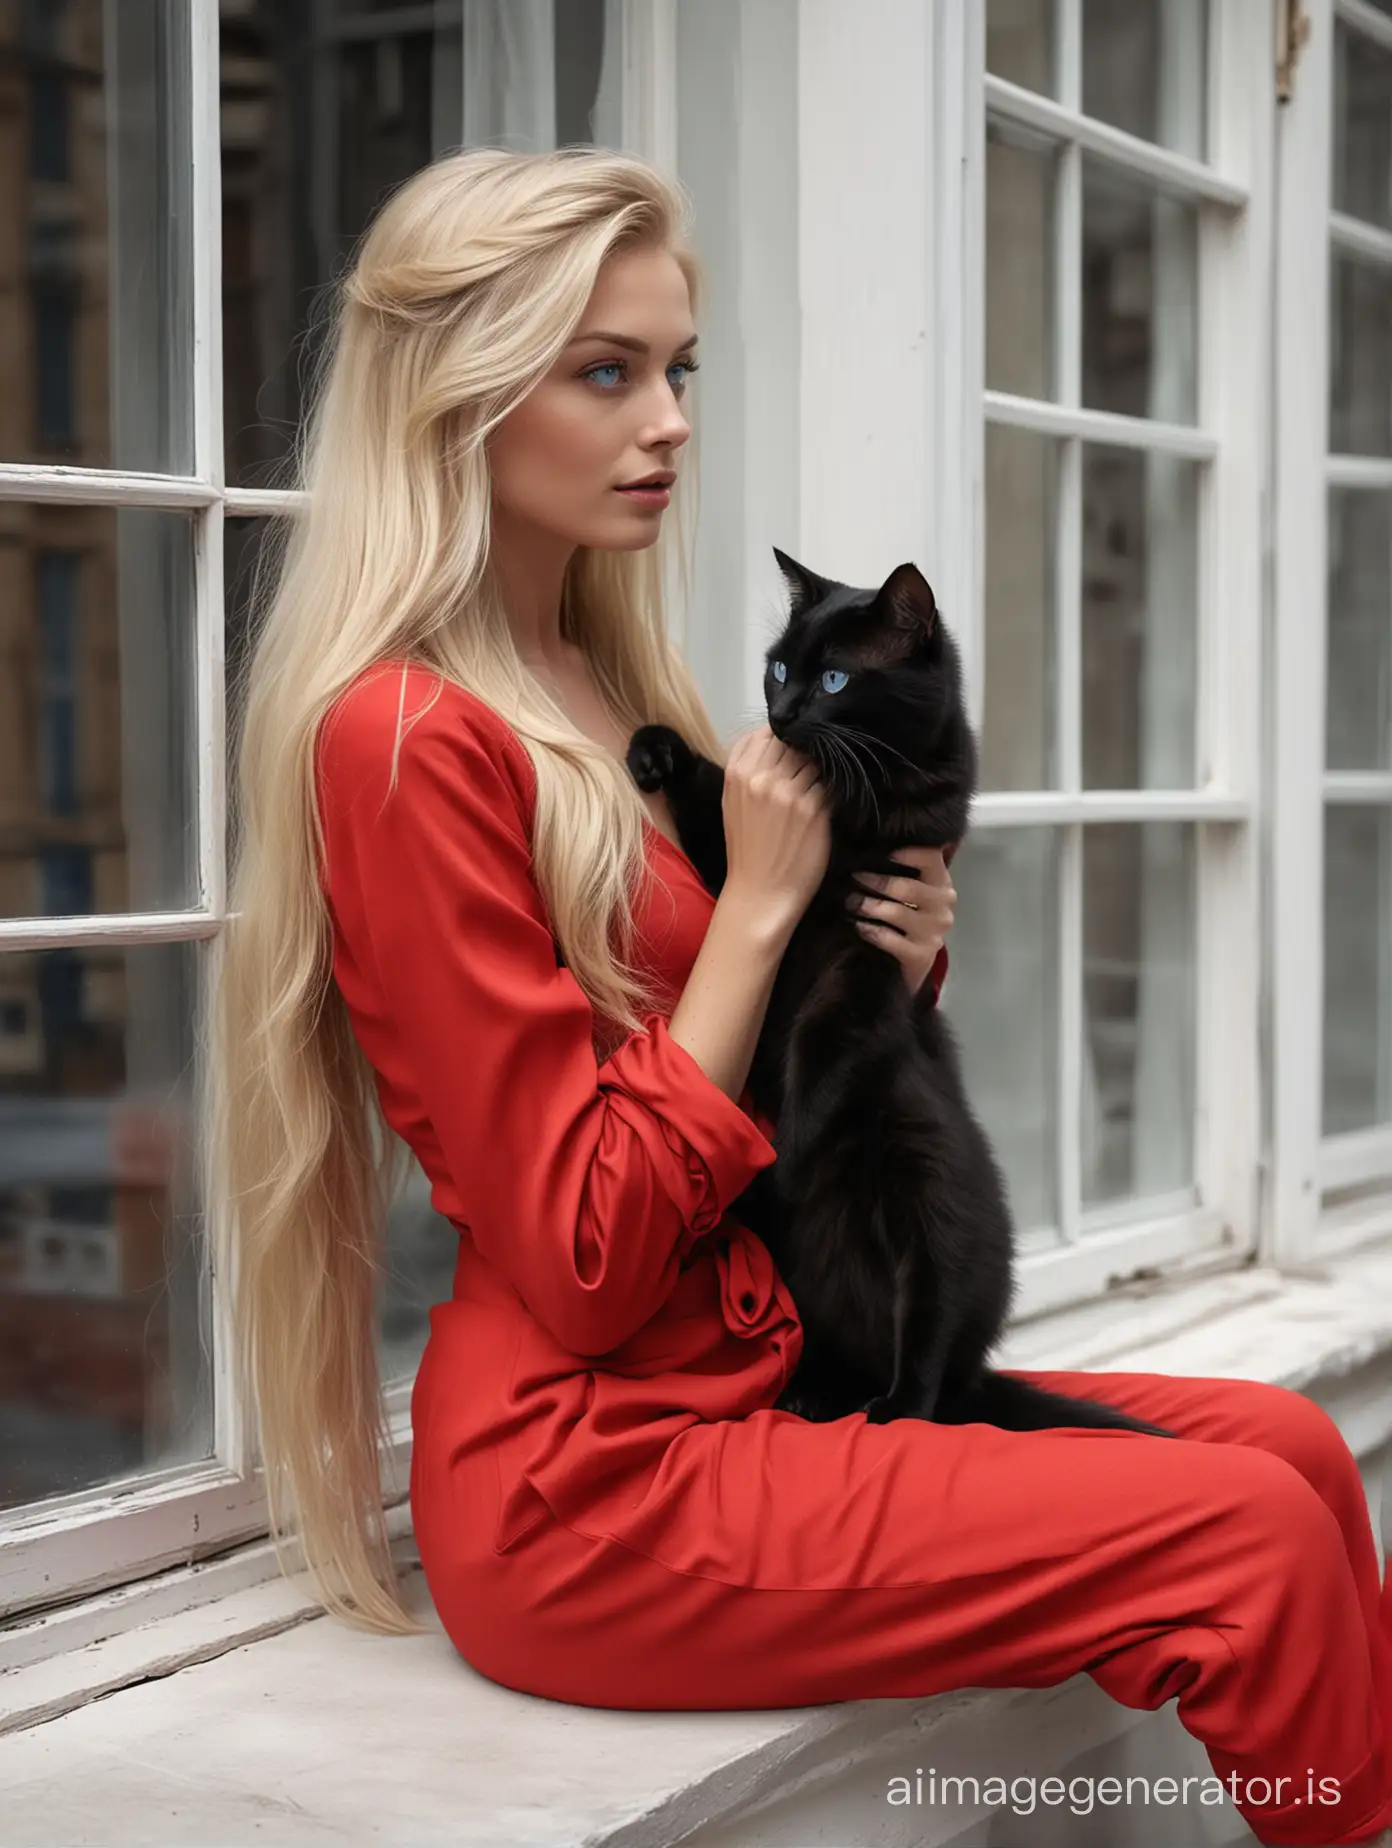 Iperrealistic blond fashion model, long hair, blue eyes, wearing red clothes, sitting on a windows, side view, holding a black cat